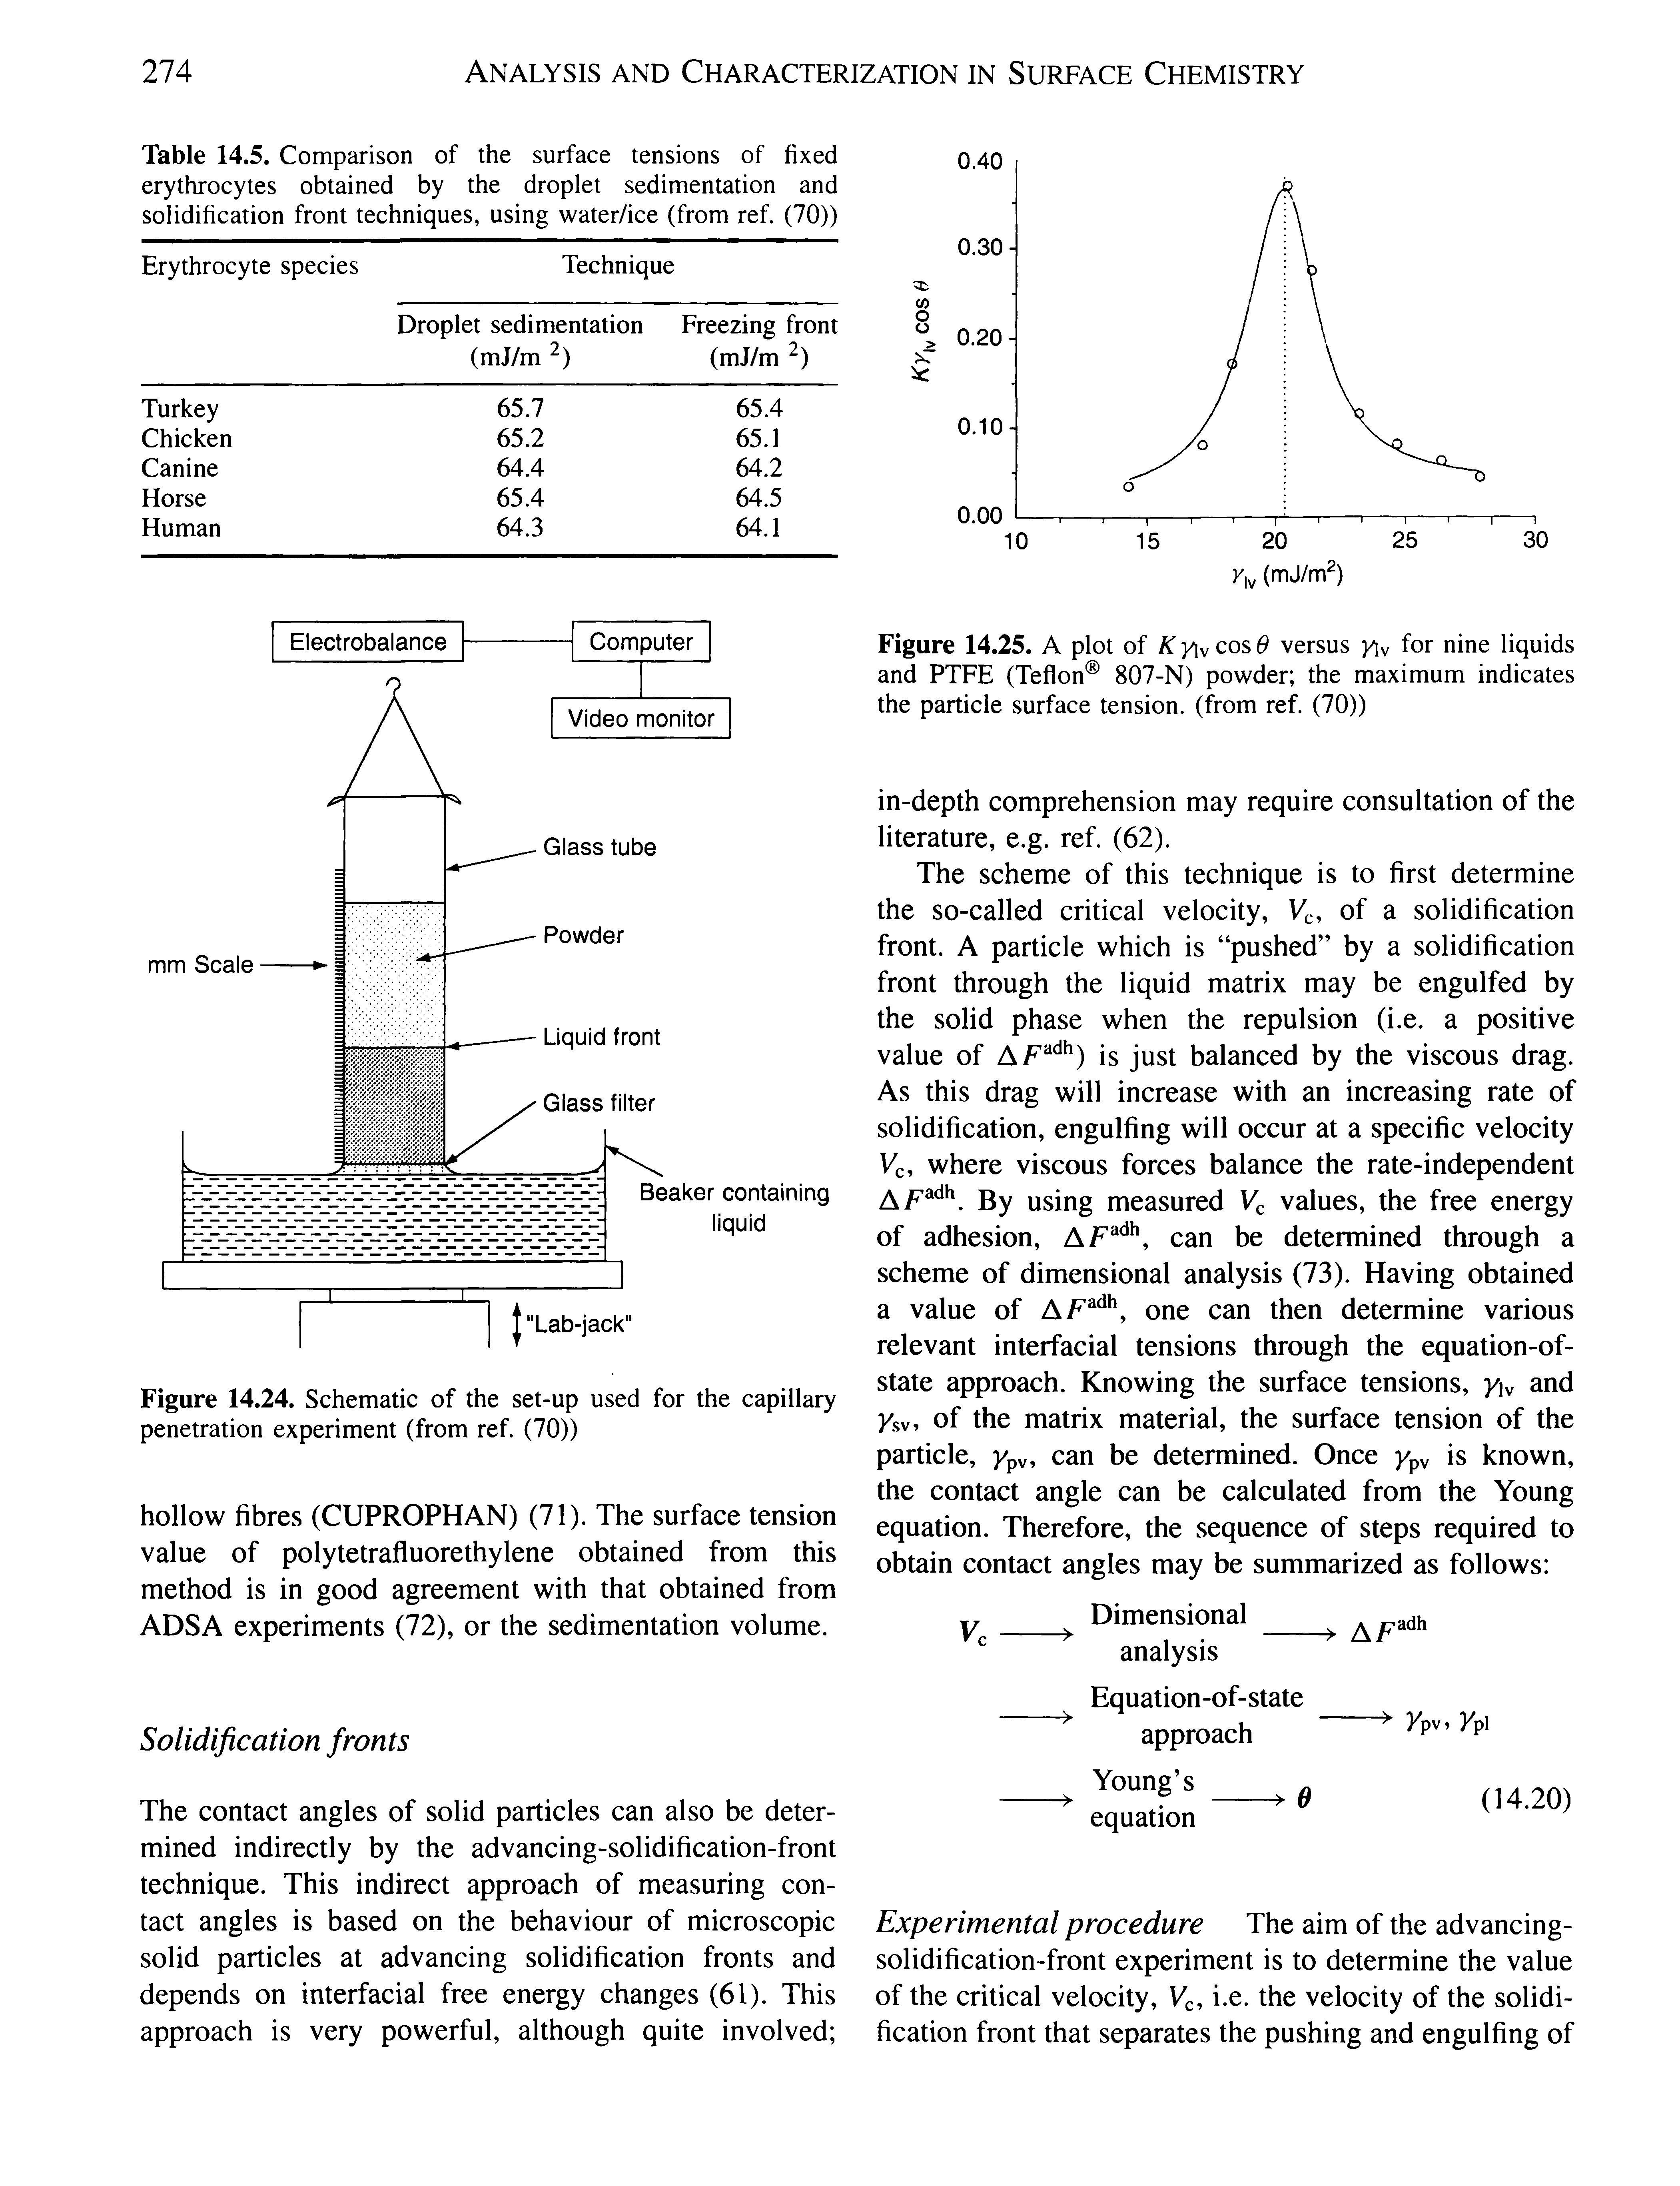 Table 14.5. Comparison of the surface tensions of fixed erythrocytes obtained by the droplet sedimentation and solidification front techniques, using water/ice (from ref. (70))...